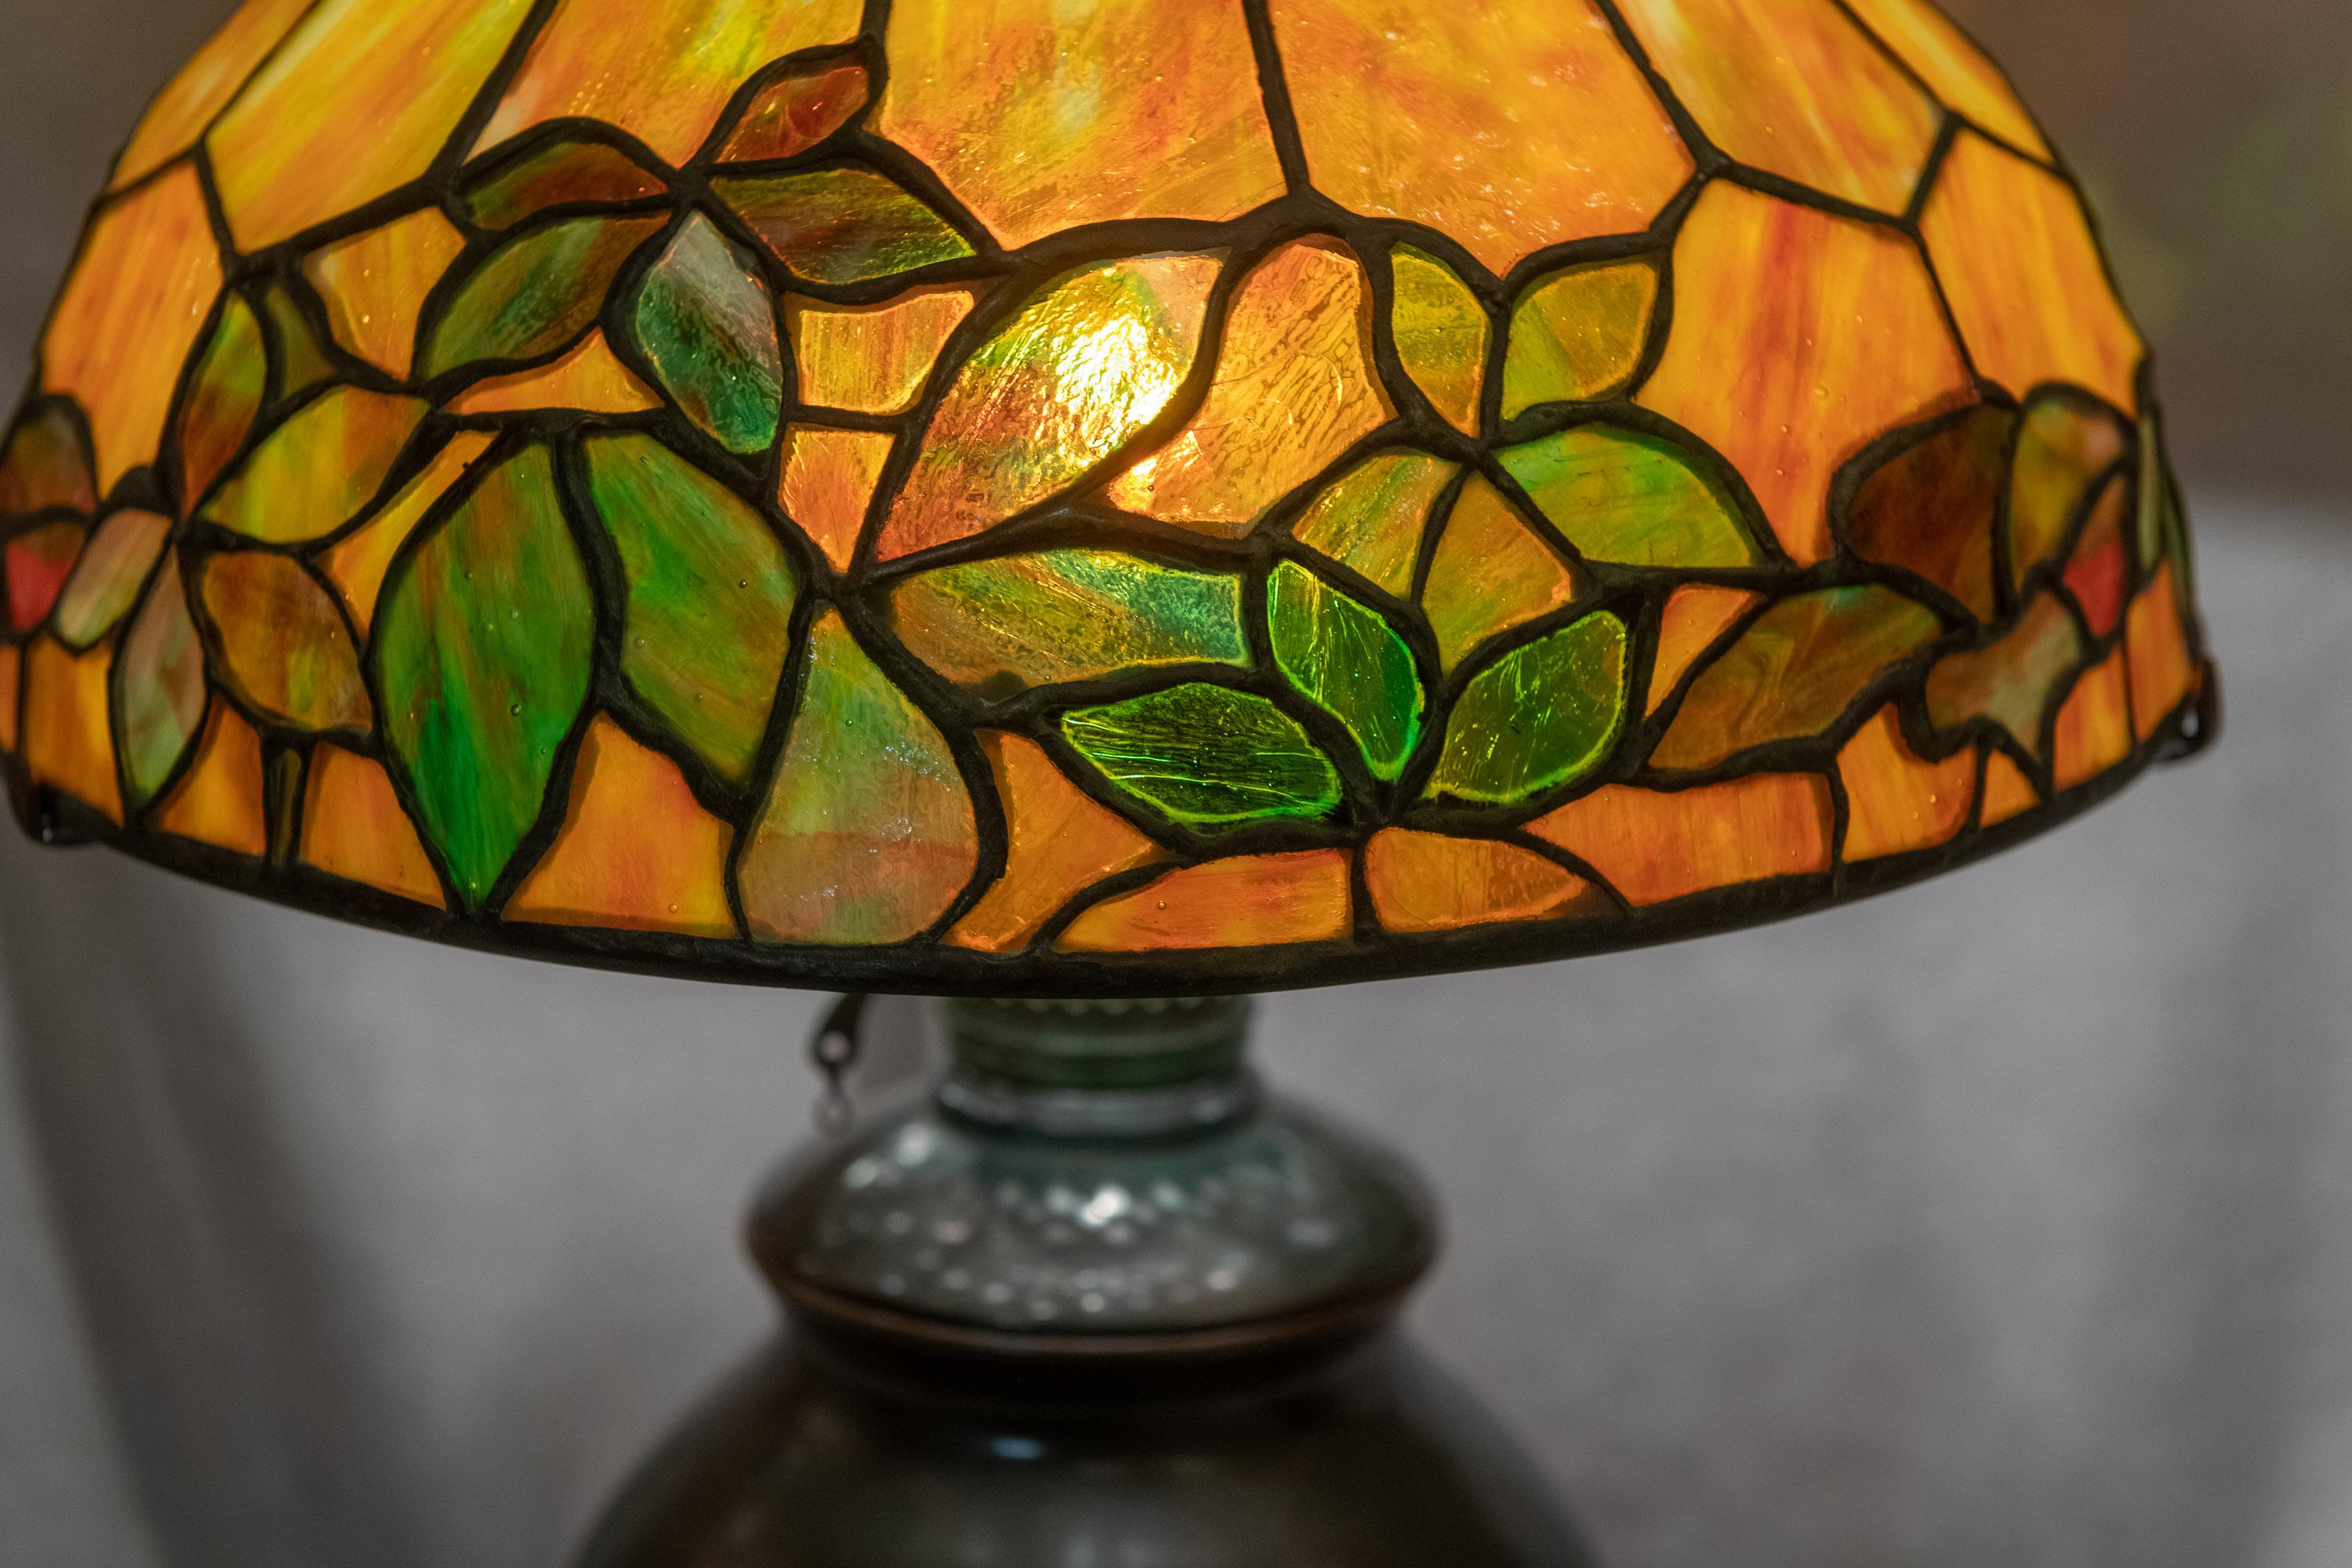 There is a reason why Tiffany is the most sought after of all the great lamp companies from the turn of the century. One just needs to look at the glass and the workmanship. This shade offers some of the richest coloration Tiffany had in his